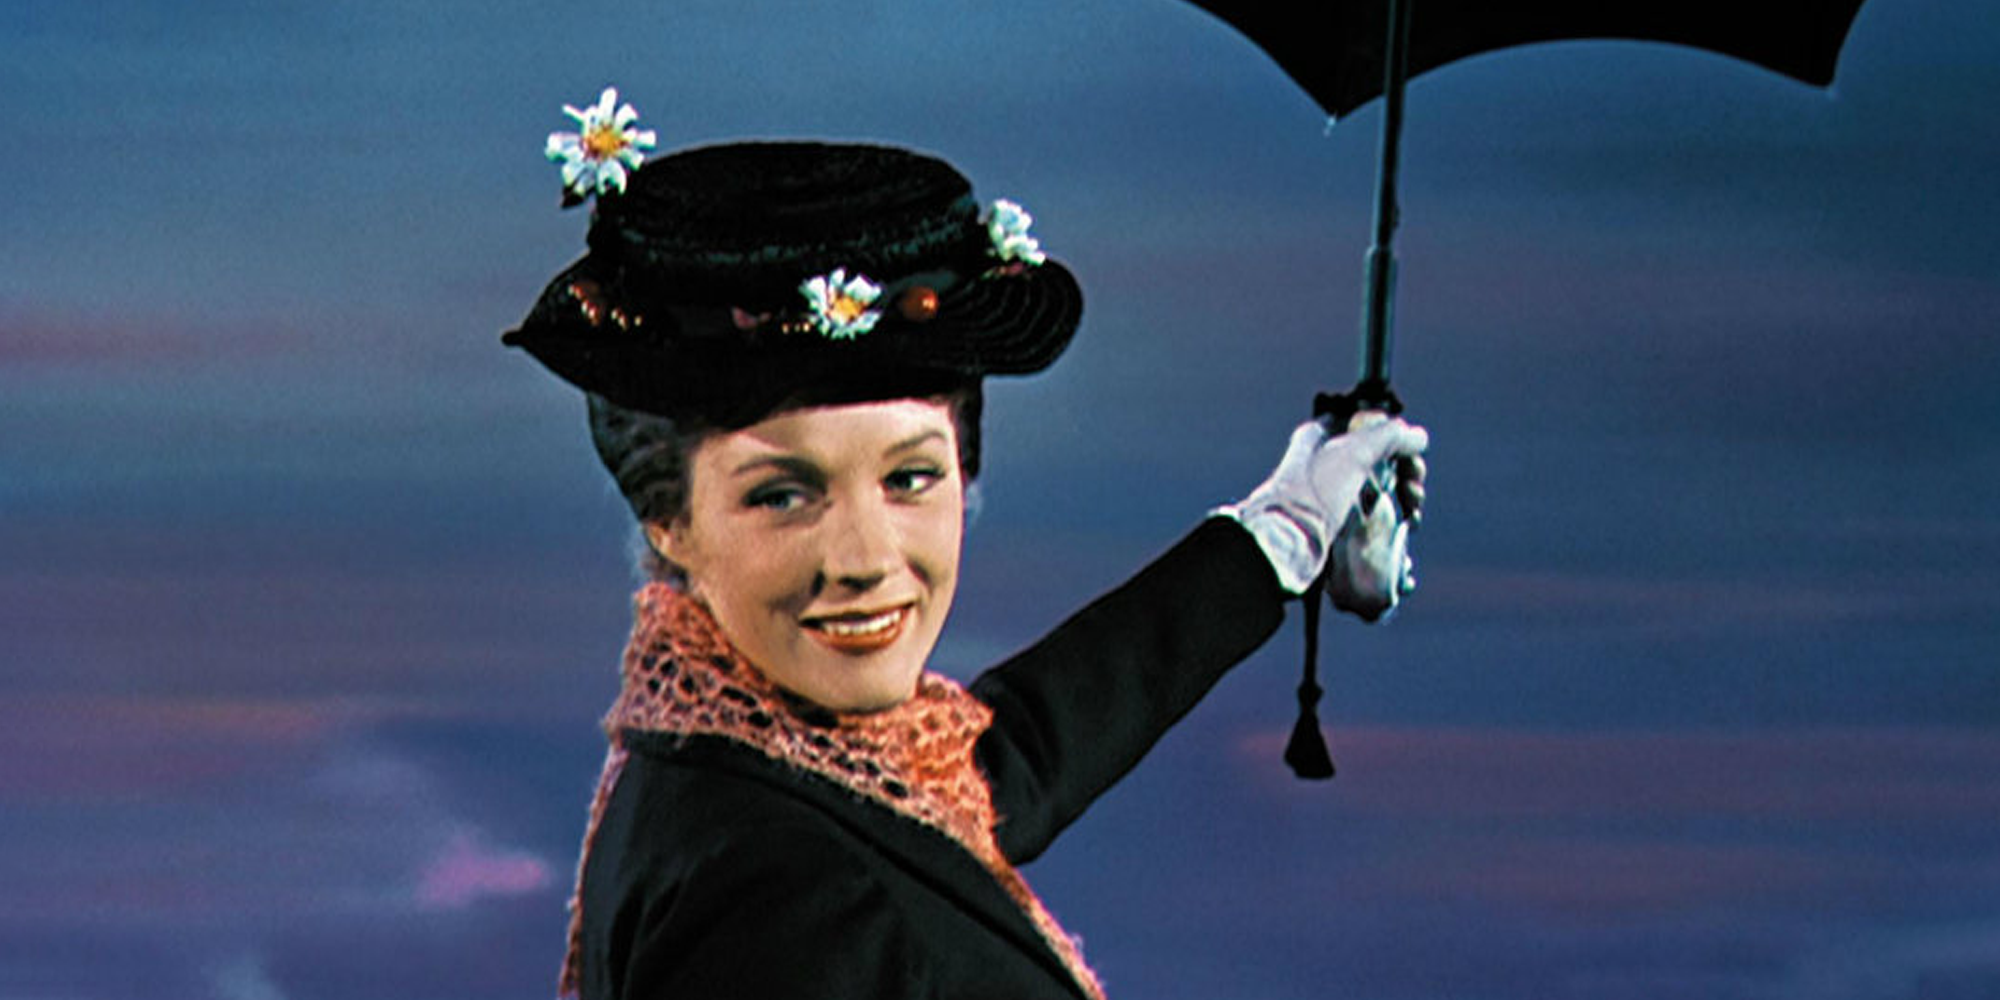 Mary Poppins with her umbrella.